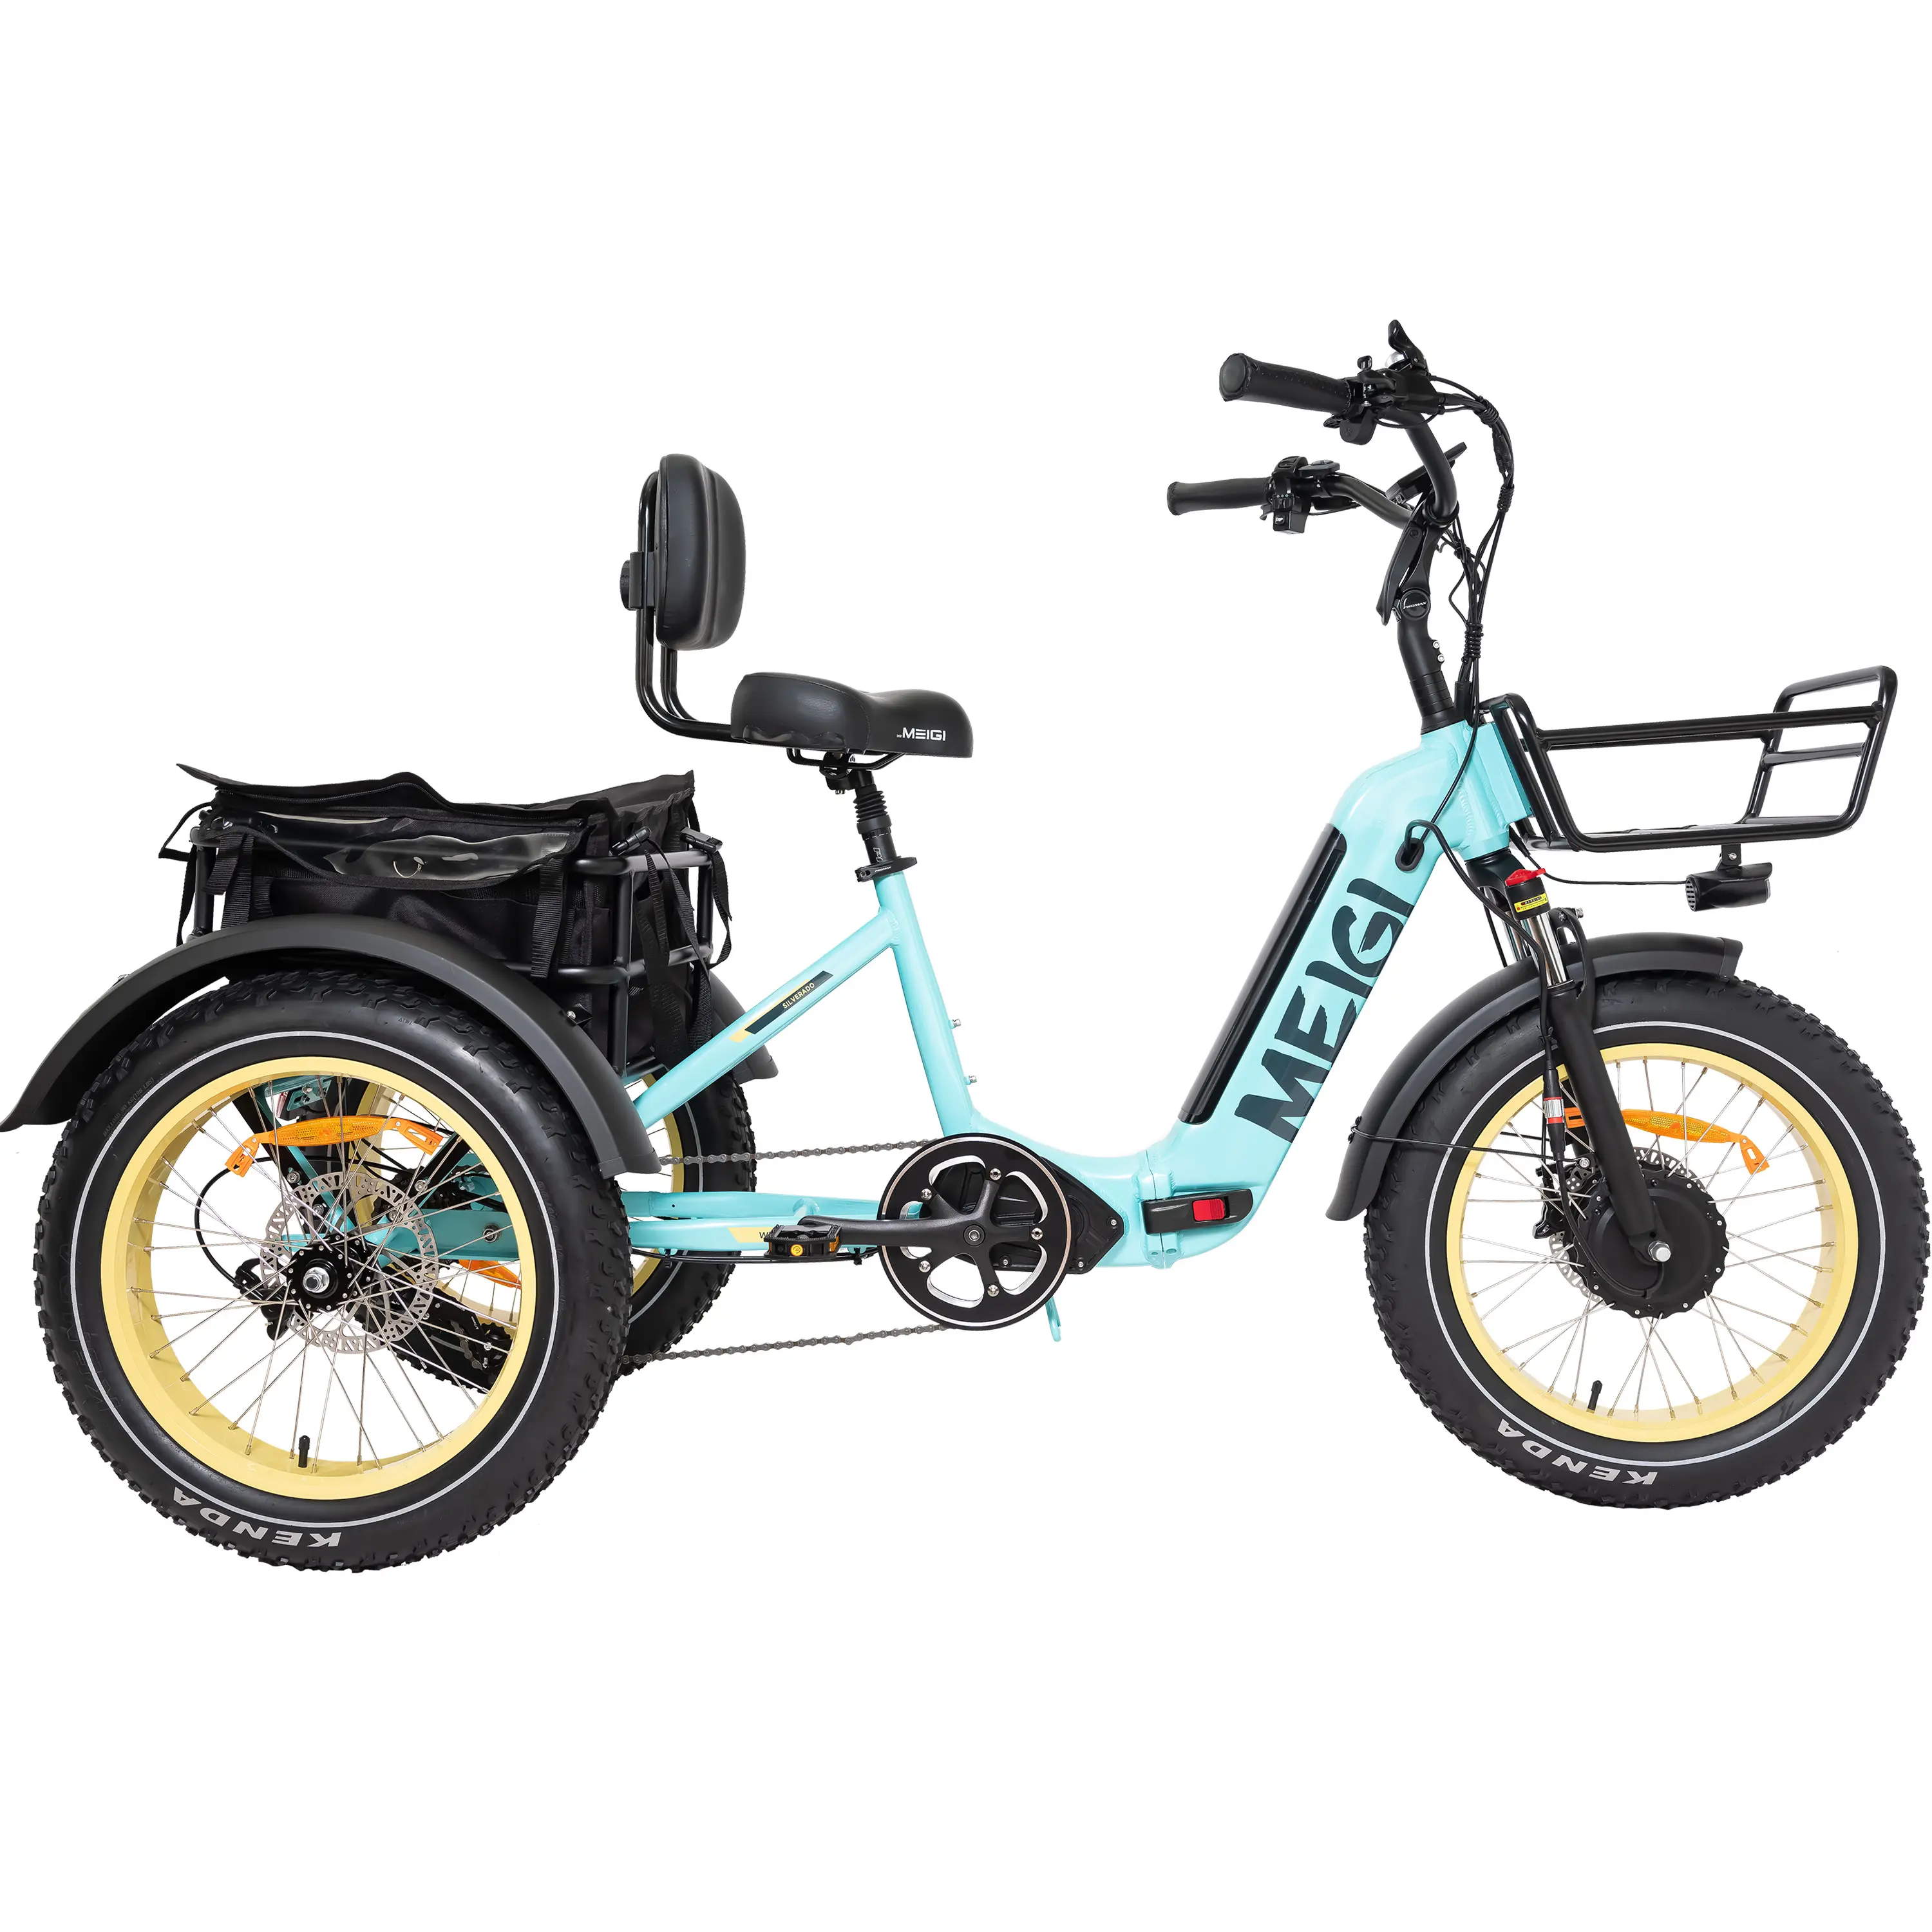 20inch electric cargo bike 750w bafang motor cargo tricycles fat tire folding electric tricycle with front suspensions fork